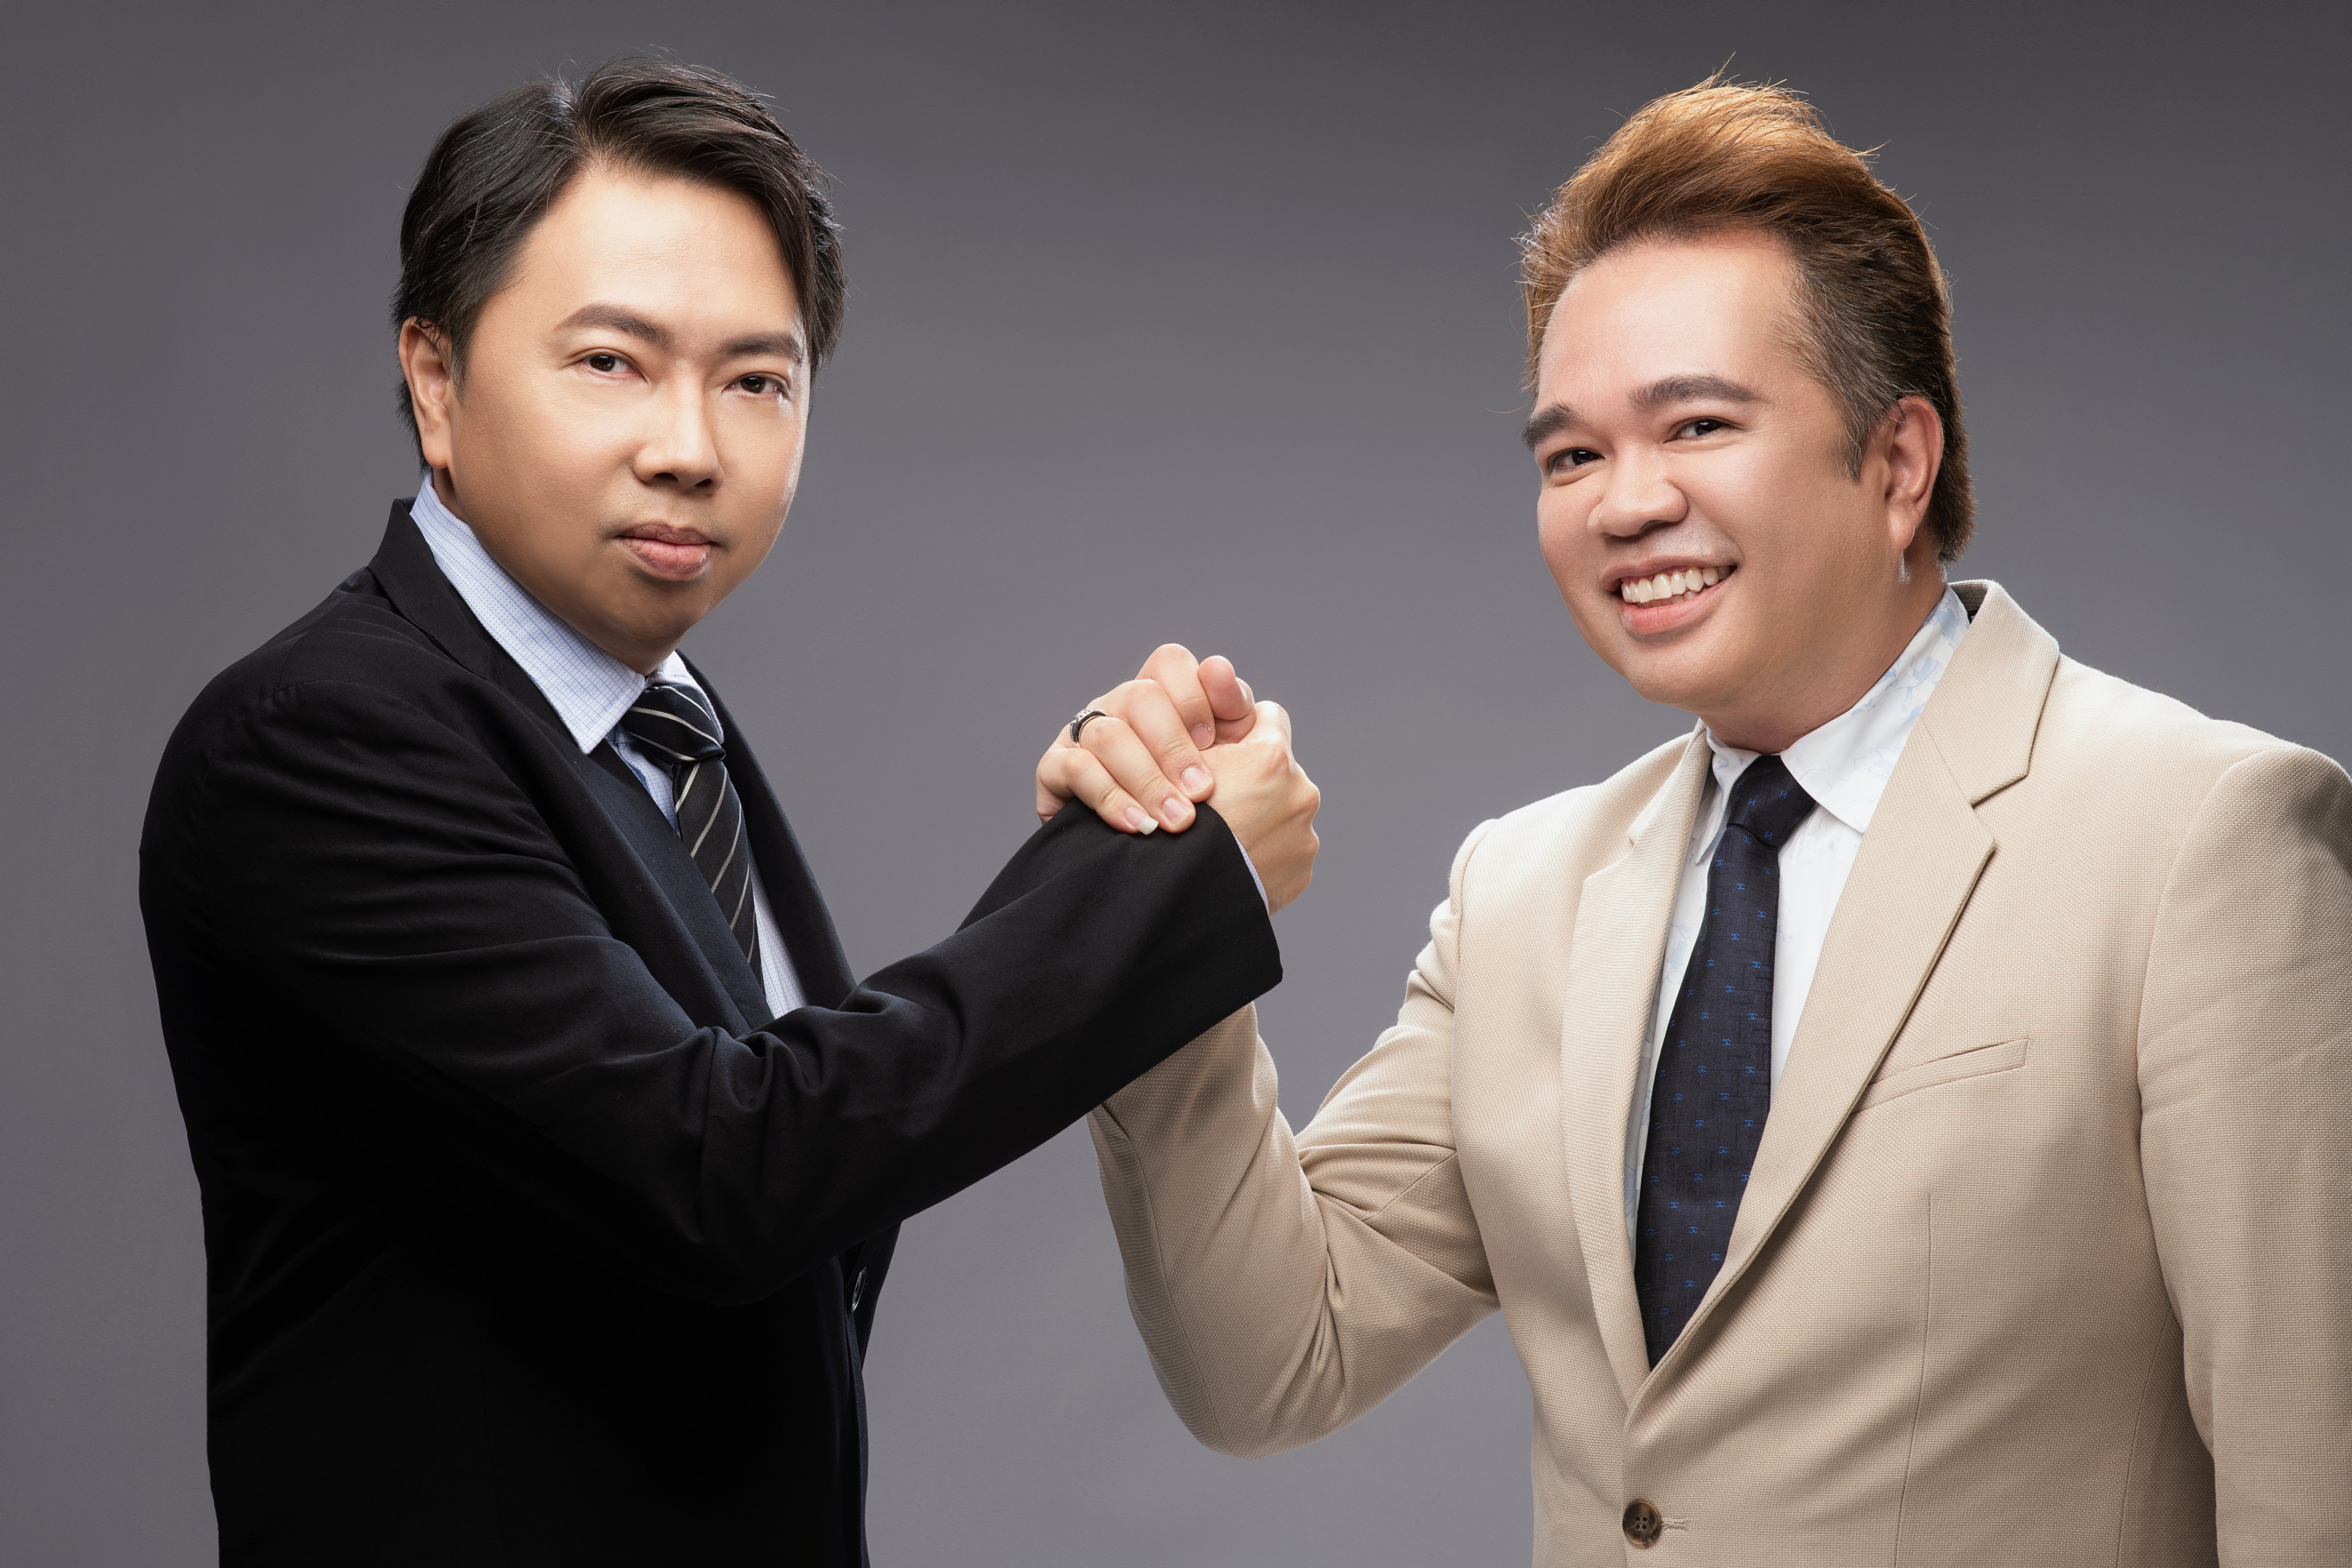 Ken Gui, founder and chairman, and Lawrence Lee, co-founder and CEO